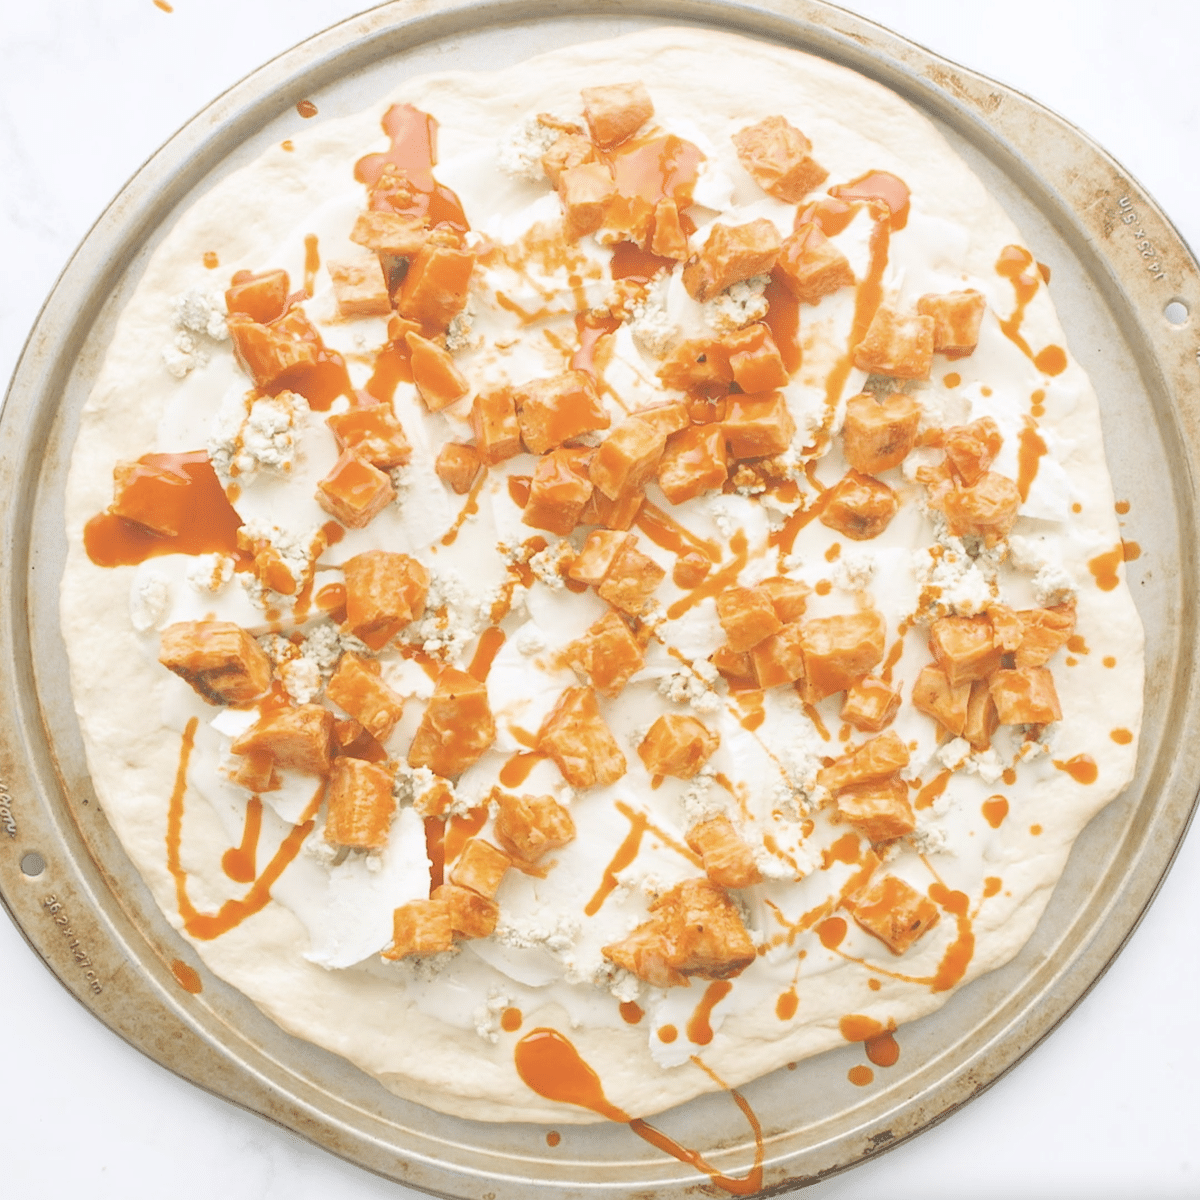 Raw pizza dough topped with buffalo chicken and hot sauce on a pizza stone.